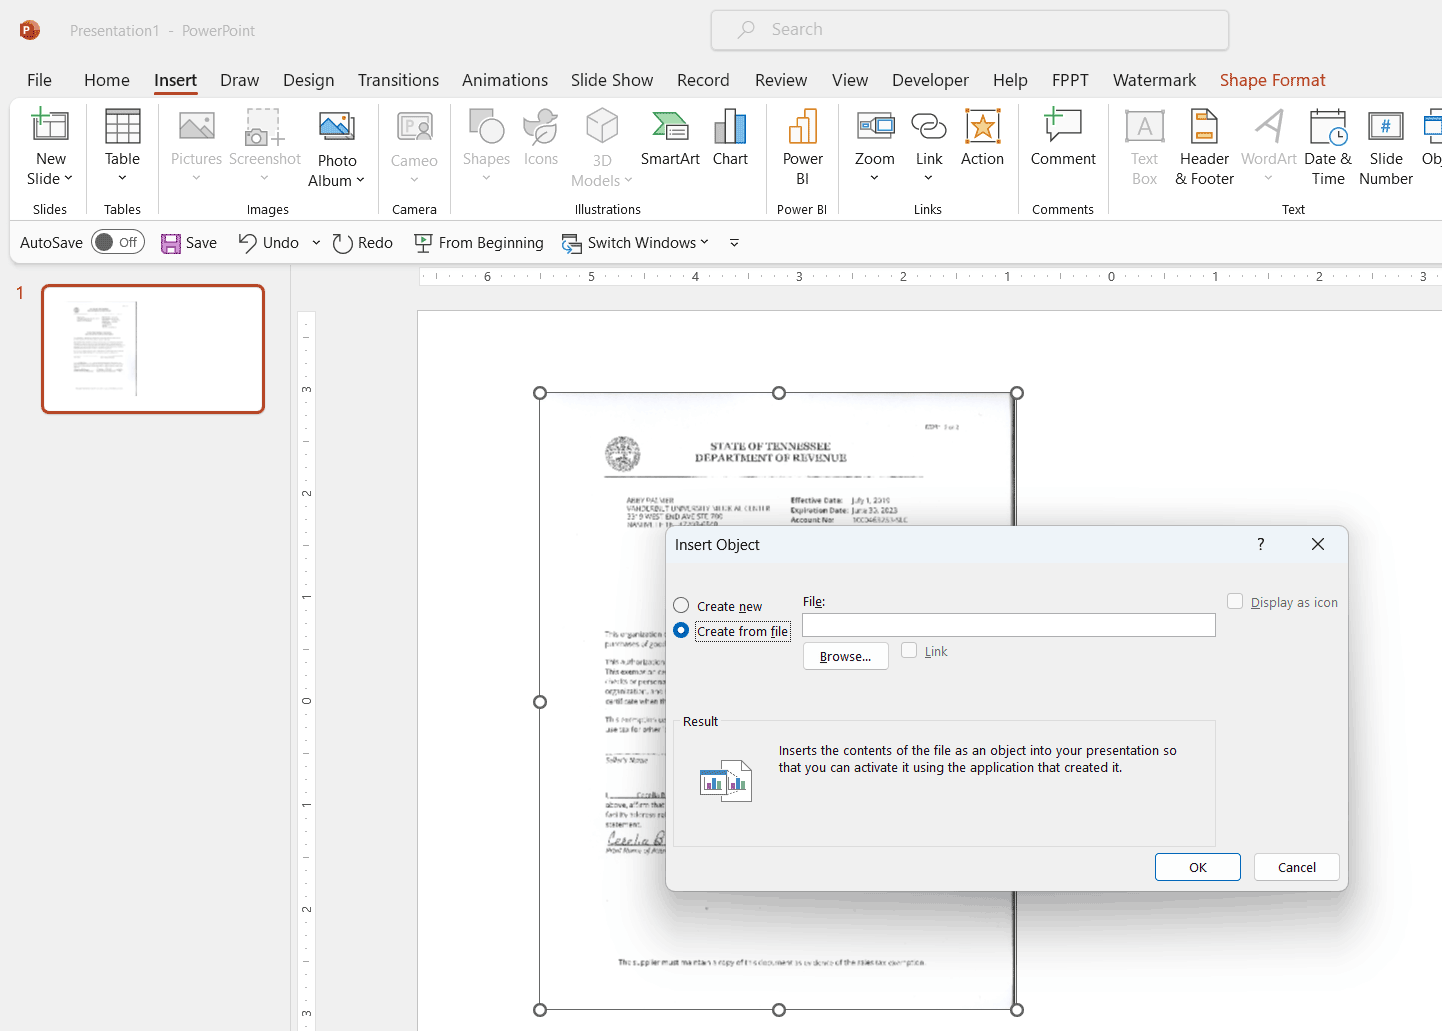 Insert PDF in a PowerPoint Presentation - Insert a PDF document directly into a PowerPoint slide using PowerPoint Insert Object feature